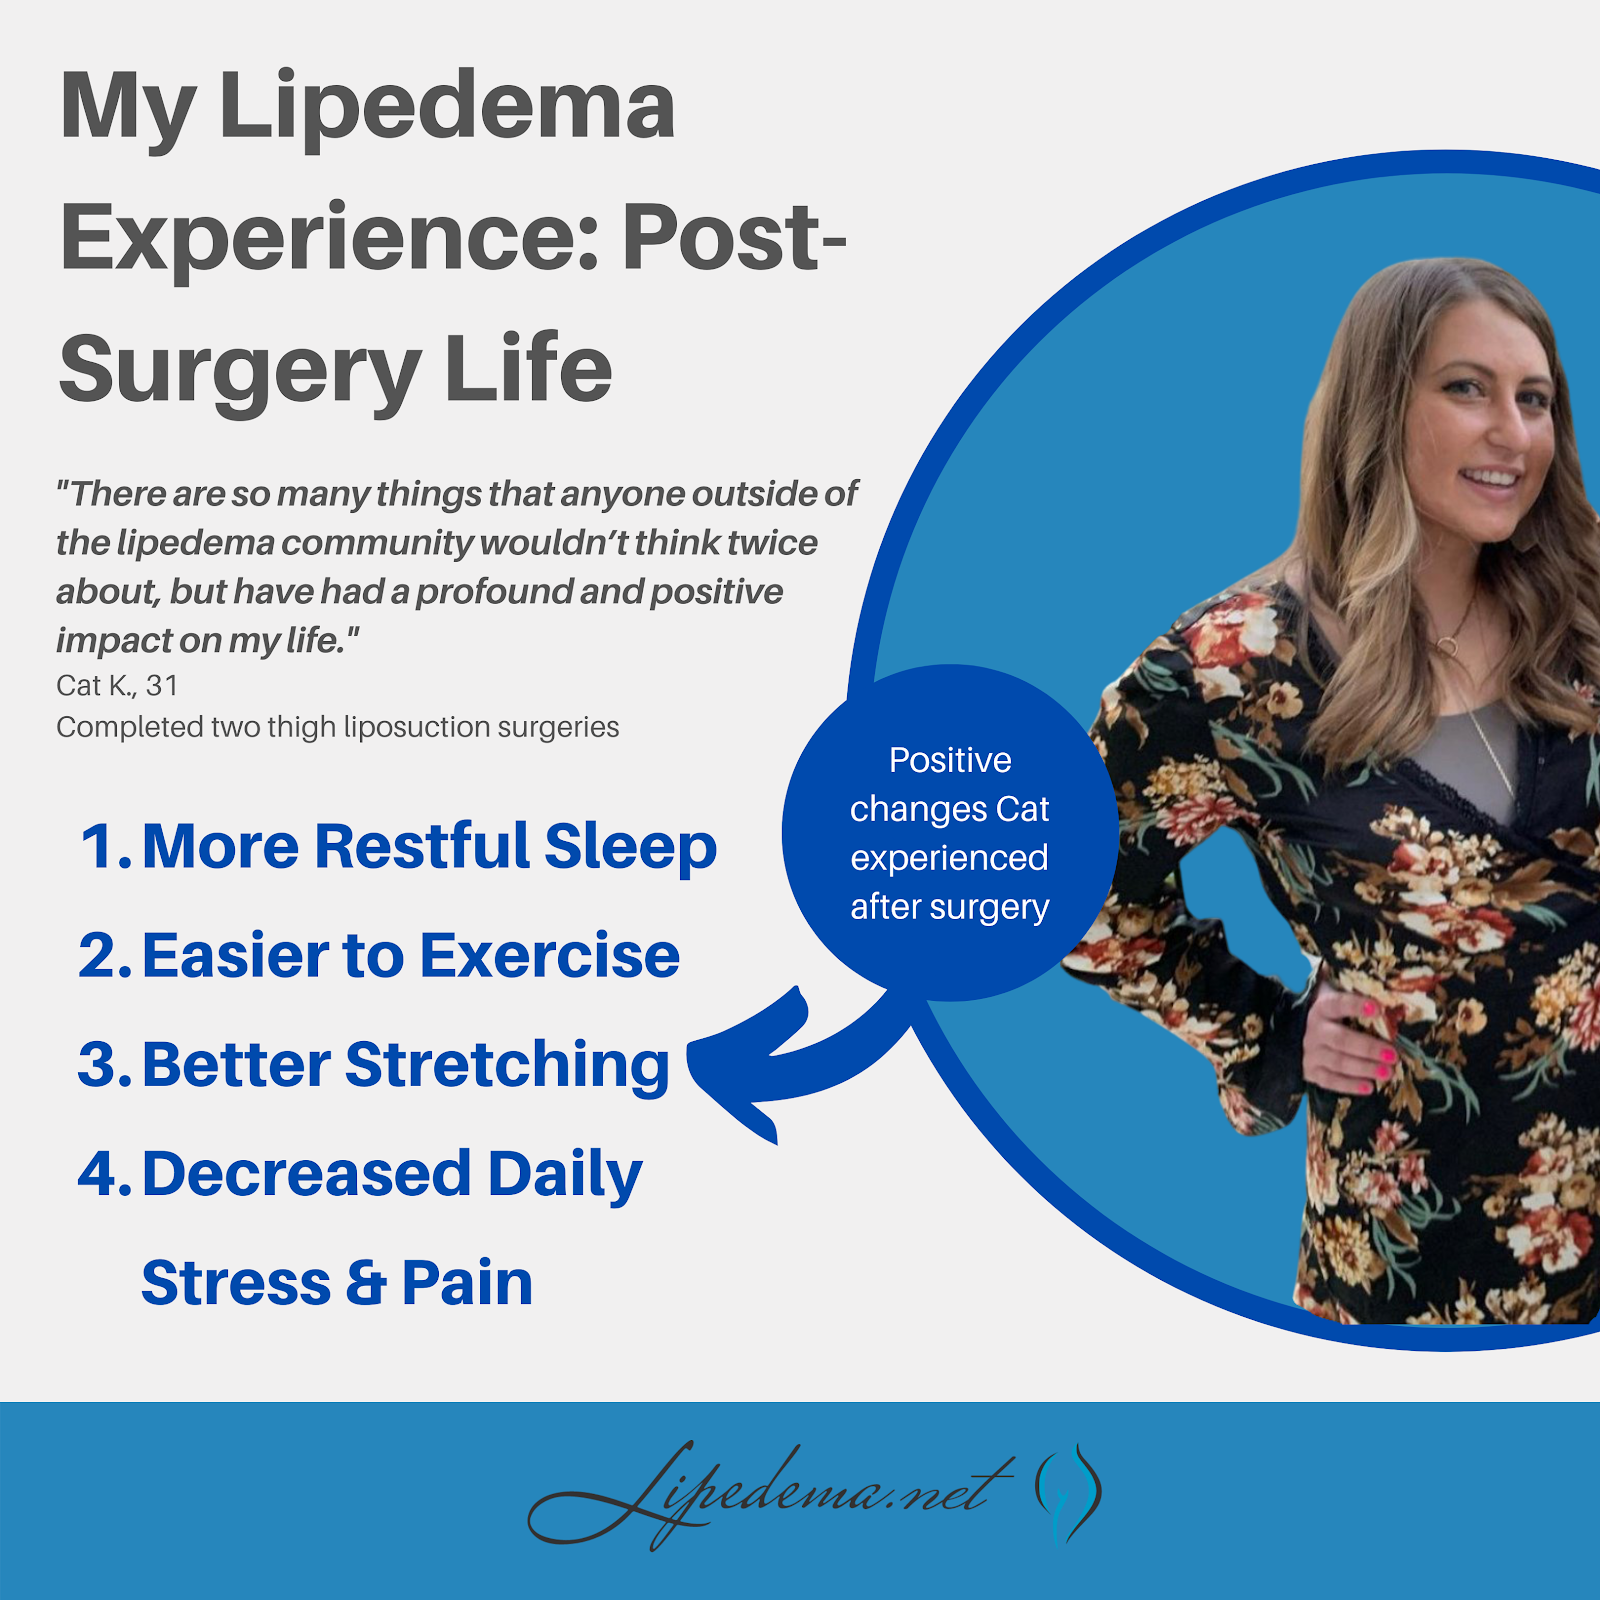 My Lipedema Experience infographic featuring Cat